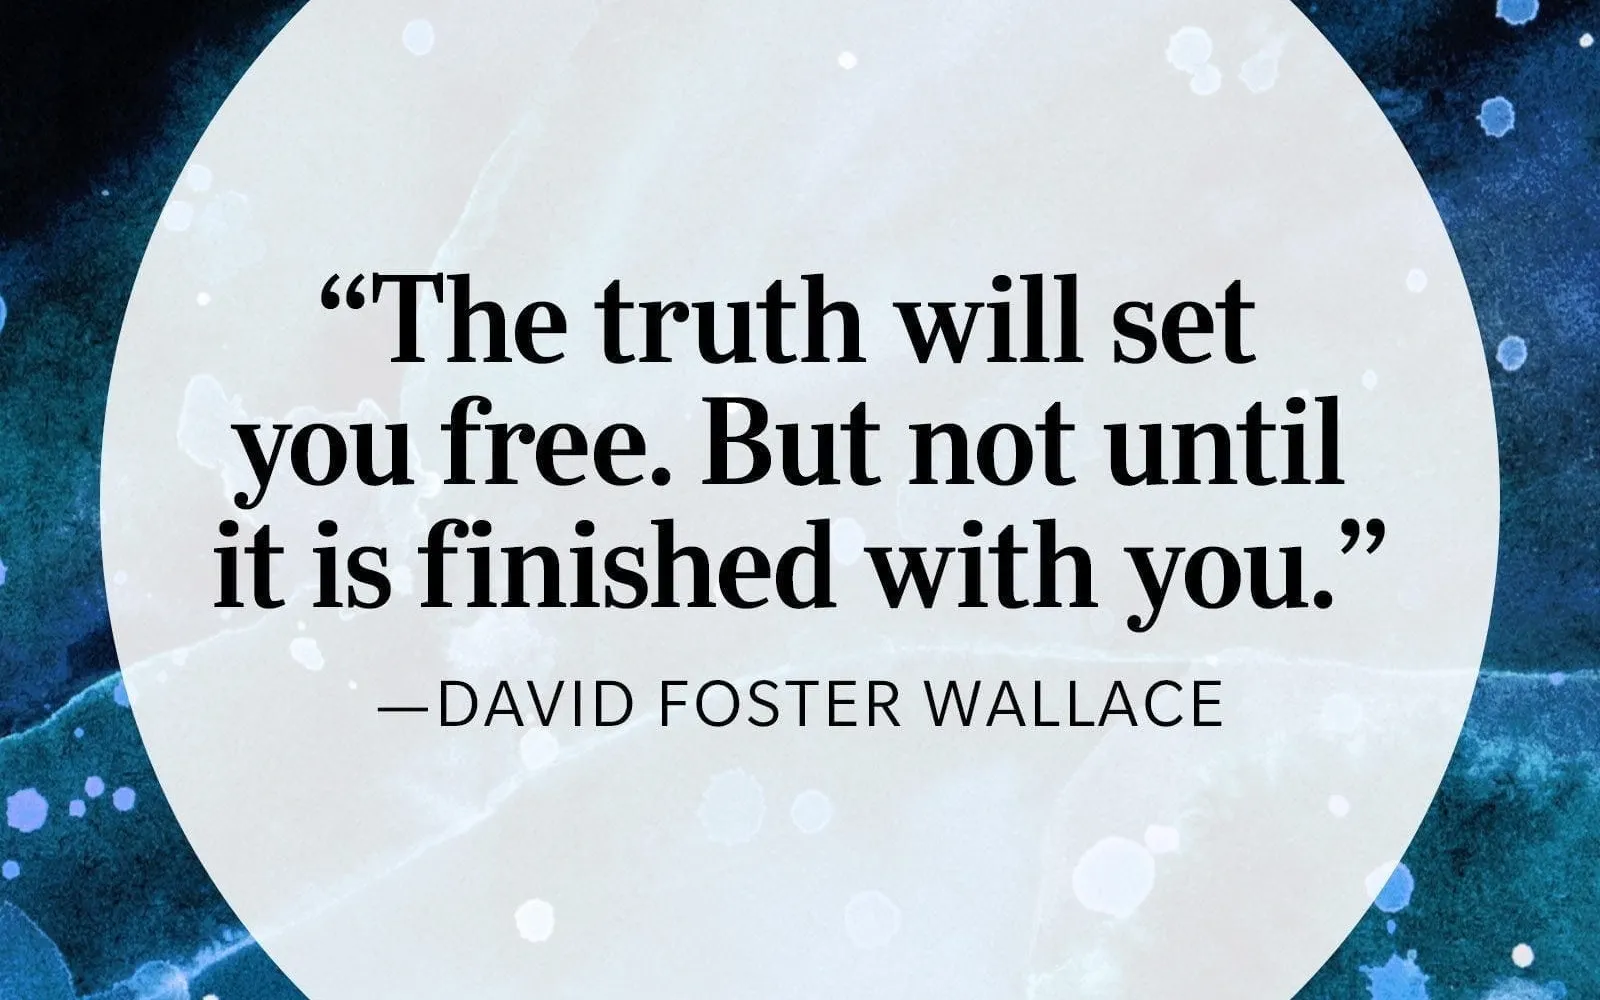 David Foster Wallace Quote: "The truth will set you free. But not until it is finished with you."